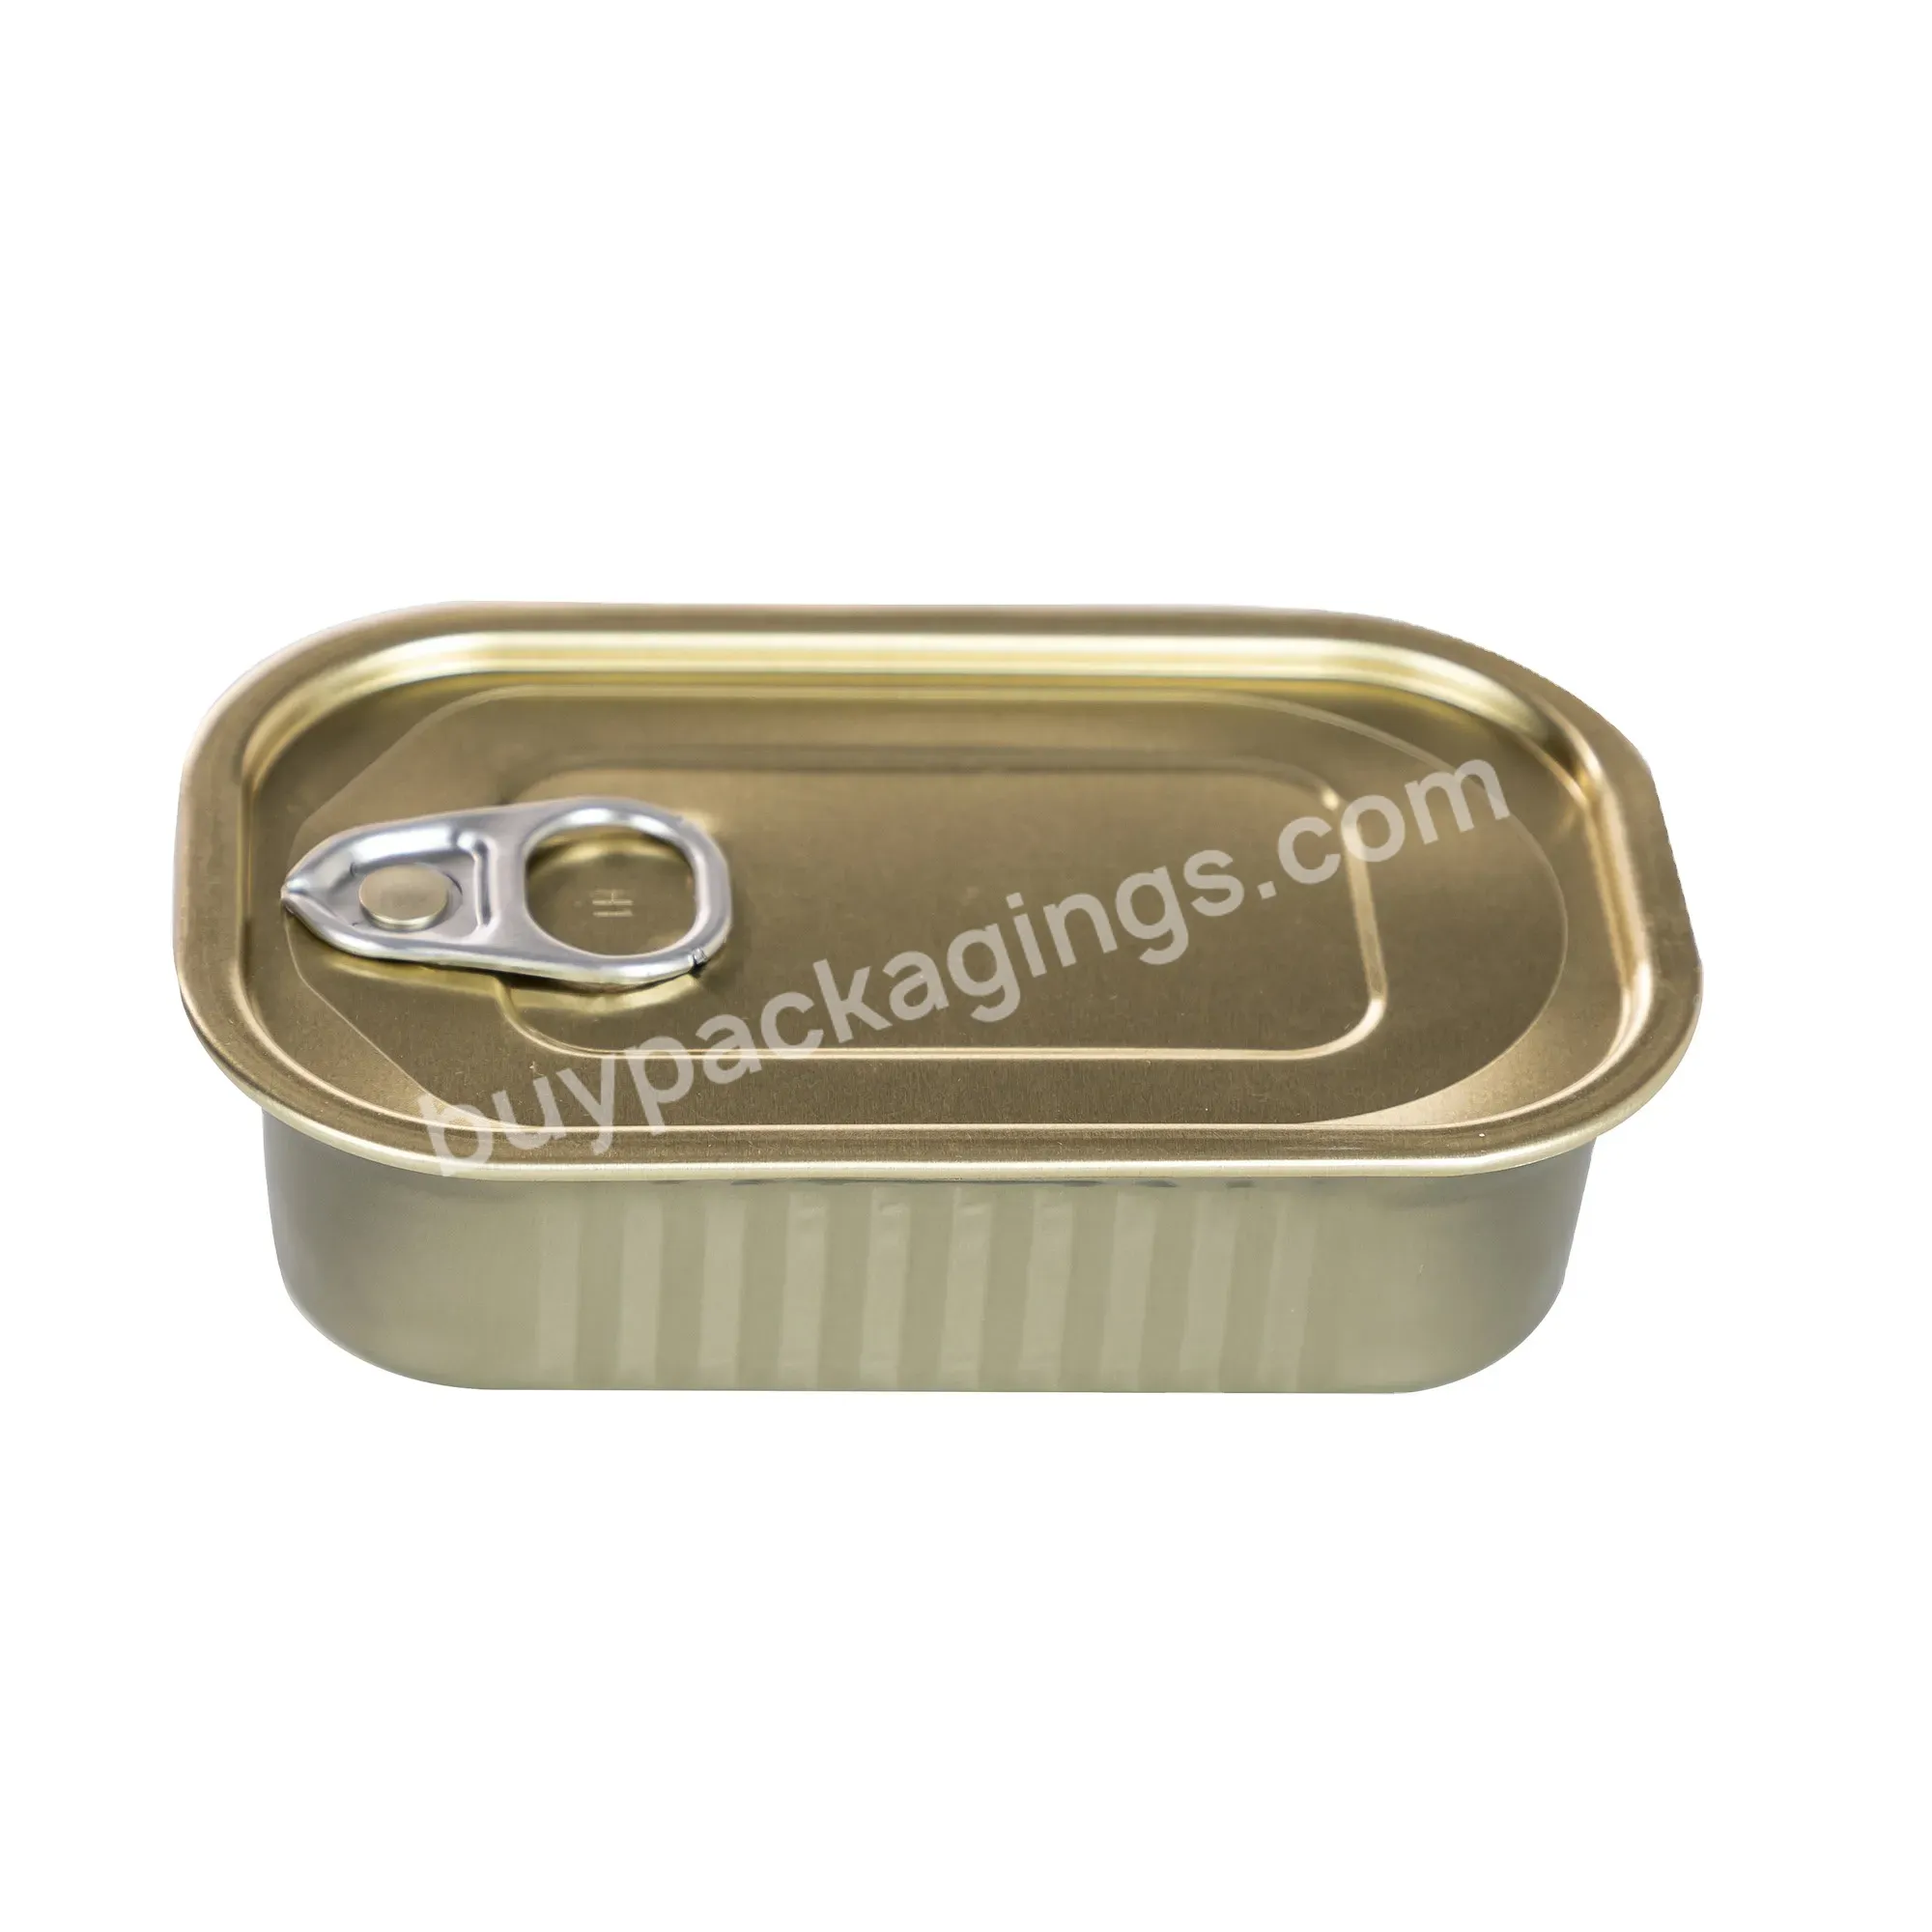 Factory Outlet 125g Club Tin Can Canned Sardines High Quality Cheap Price Custom Printing Food Packing For Sardine - Buy T 125g Club Tin Can Canned Sardines,High Quality Cheap Price,Custom Printing Food Packing For Sardine.